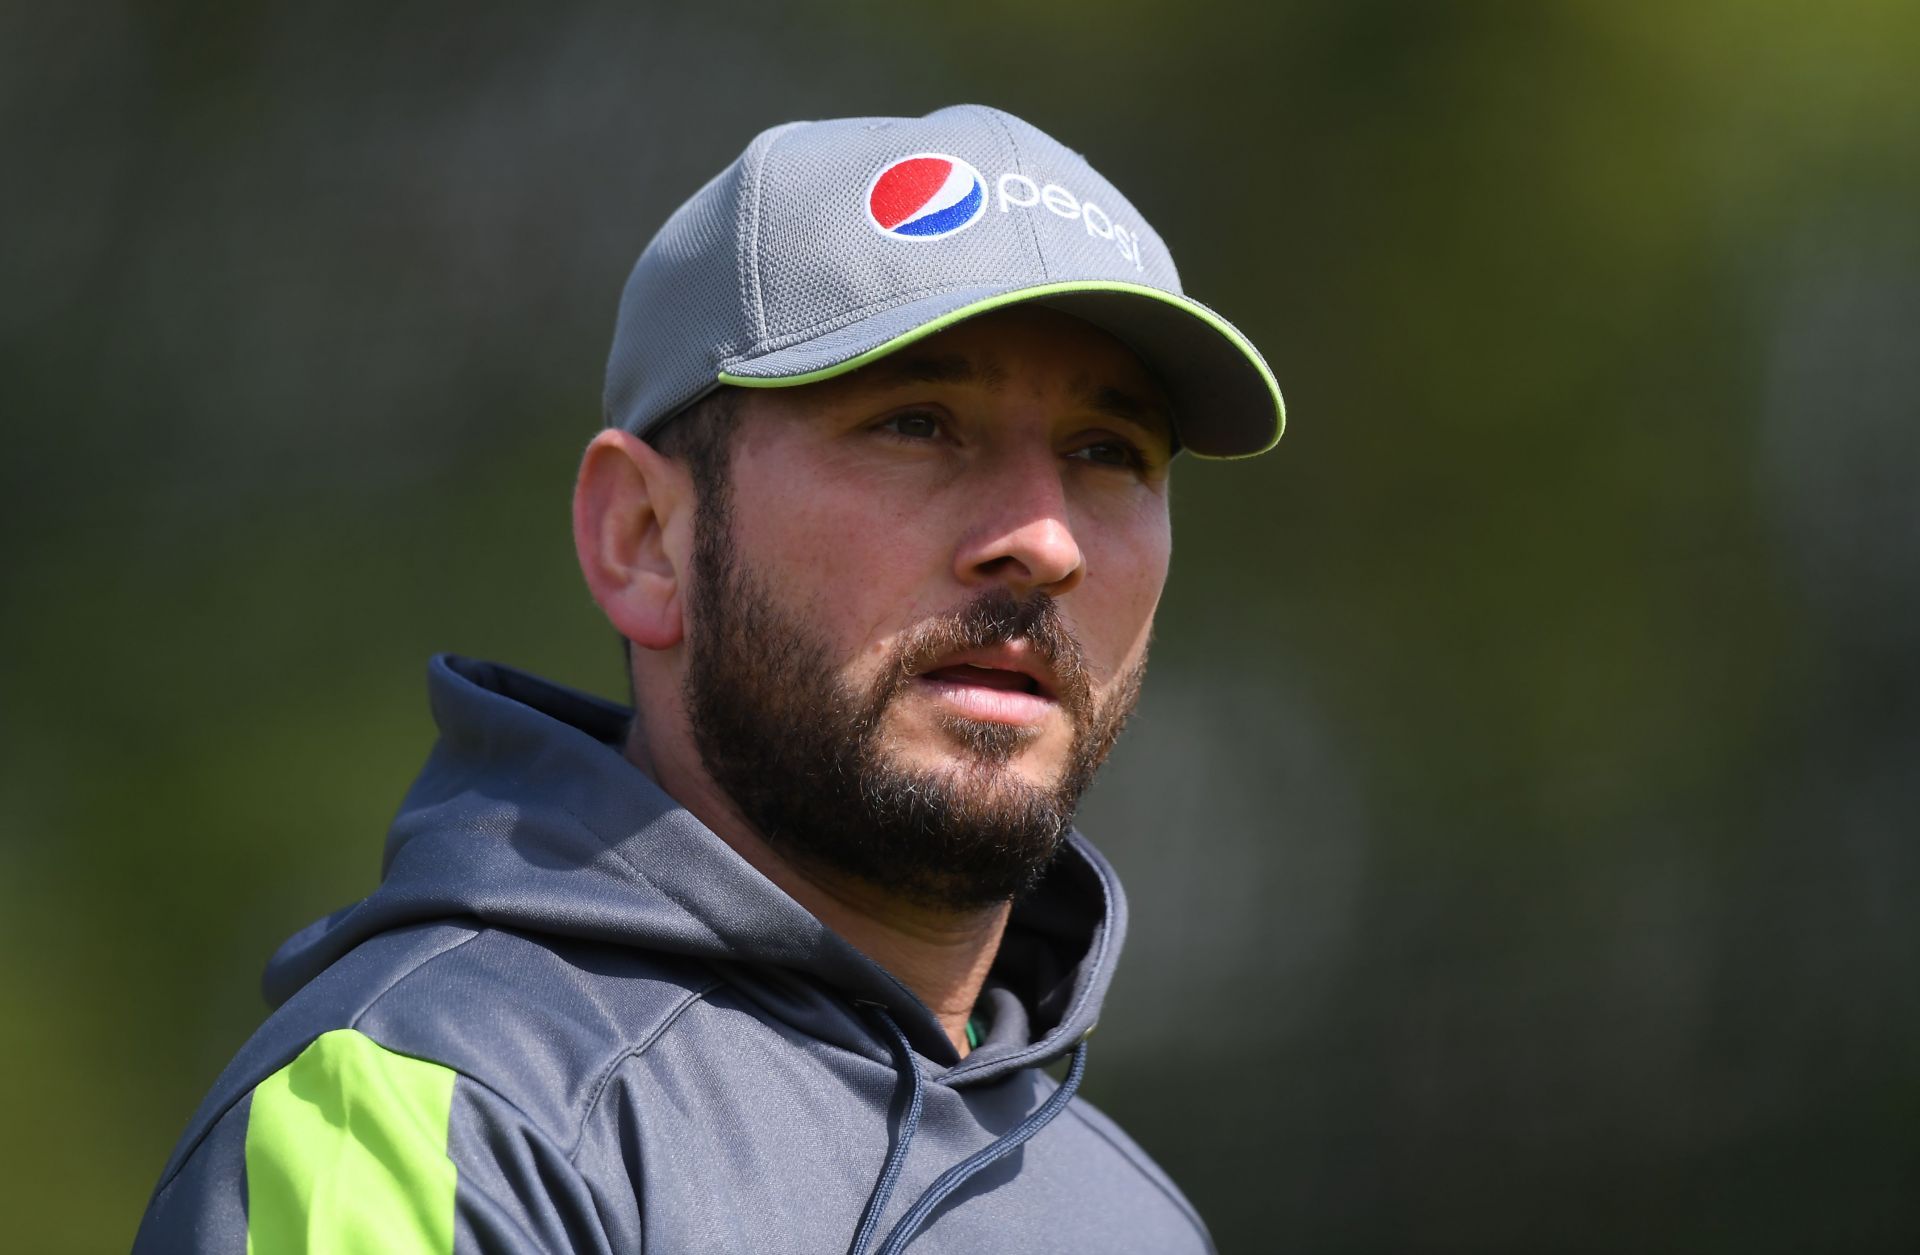 Yasir Shah has been accused of allegedly aiding a sexual assaulter.